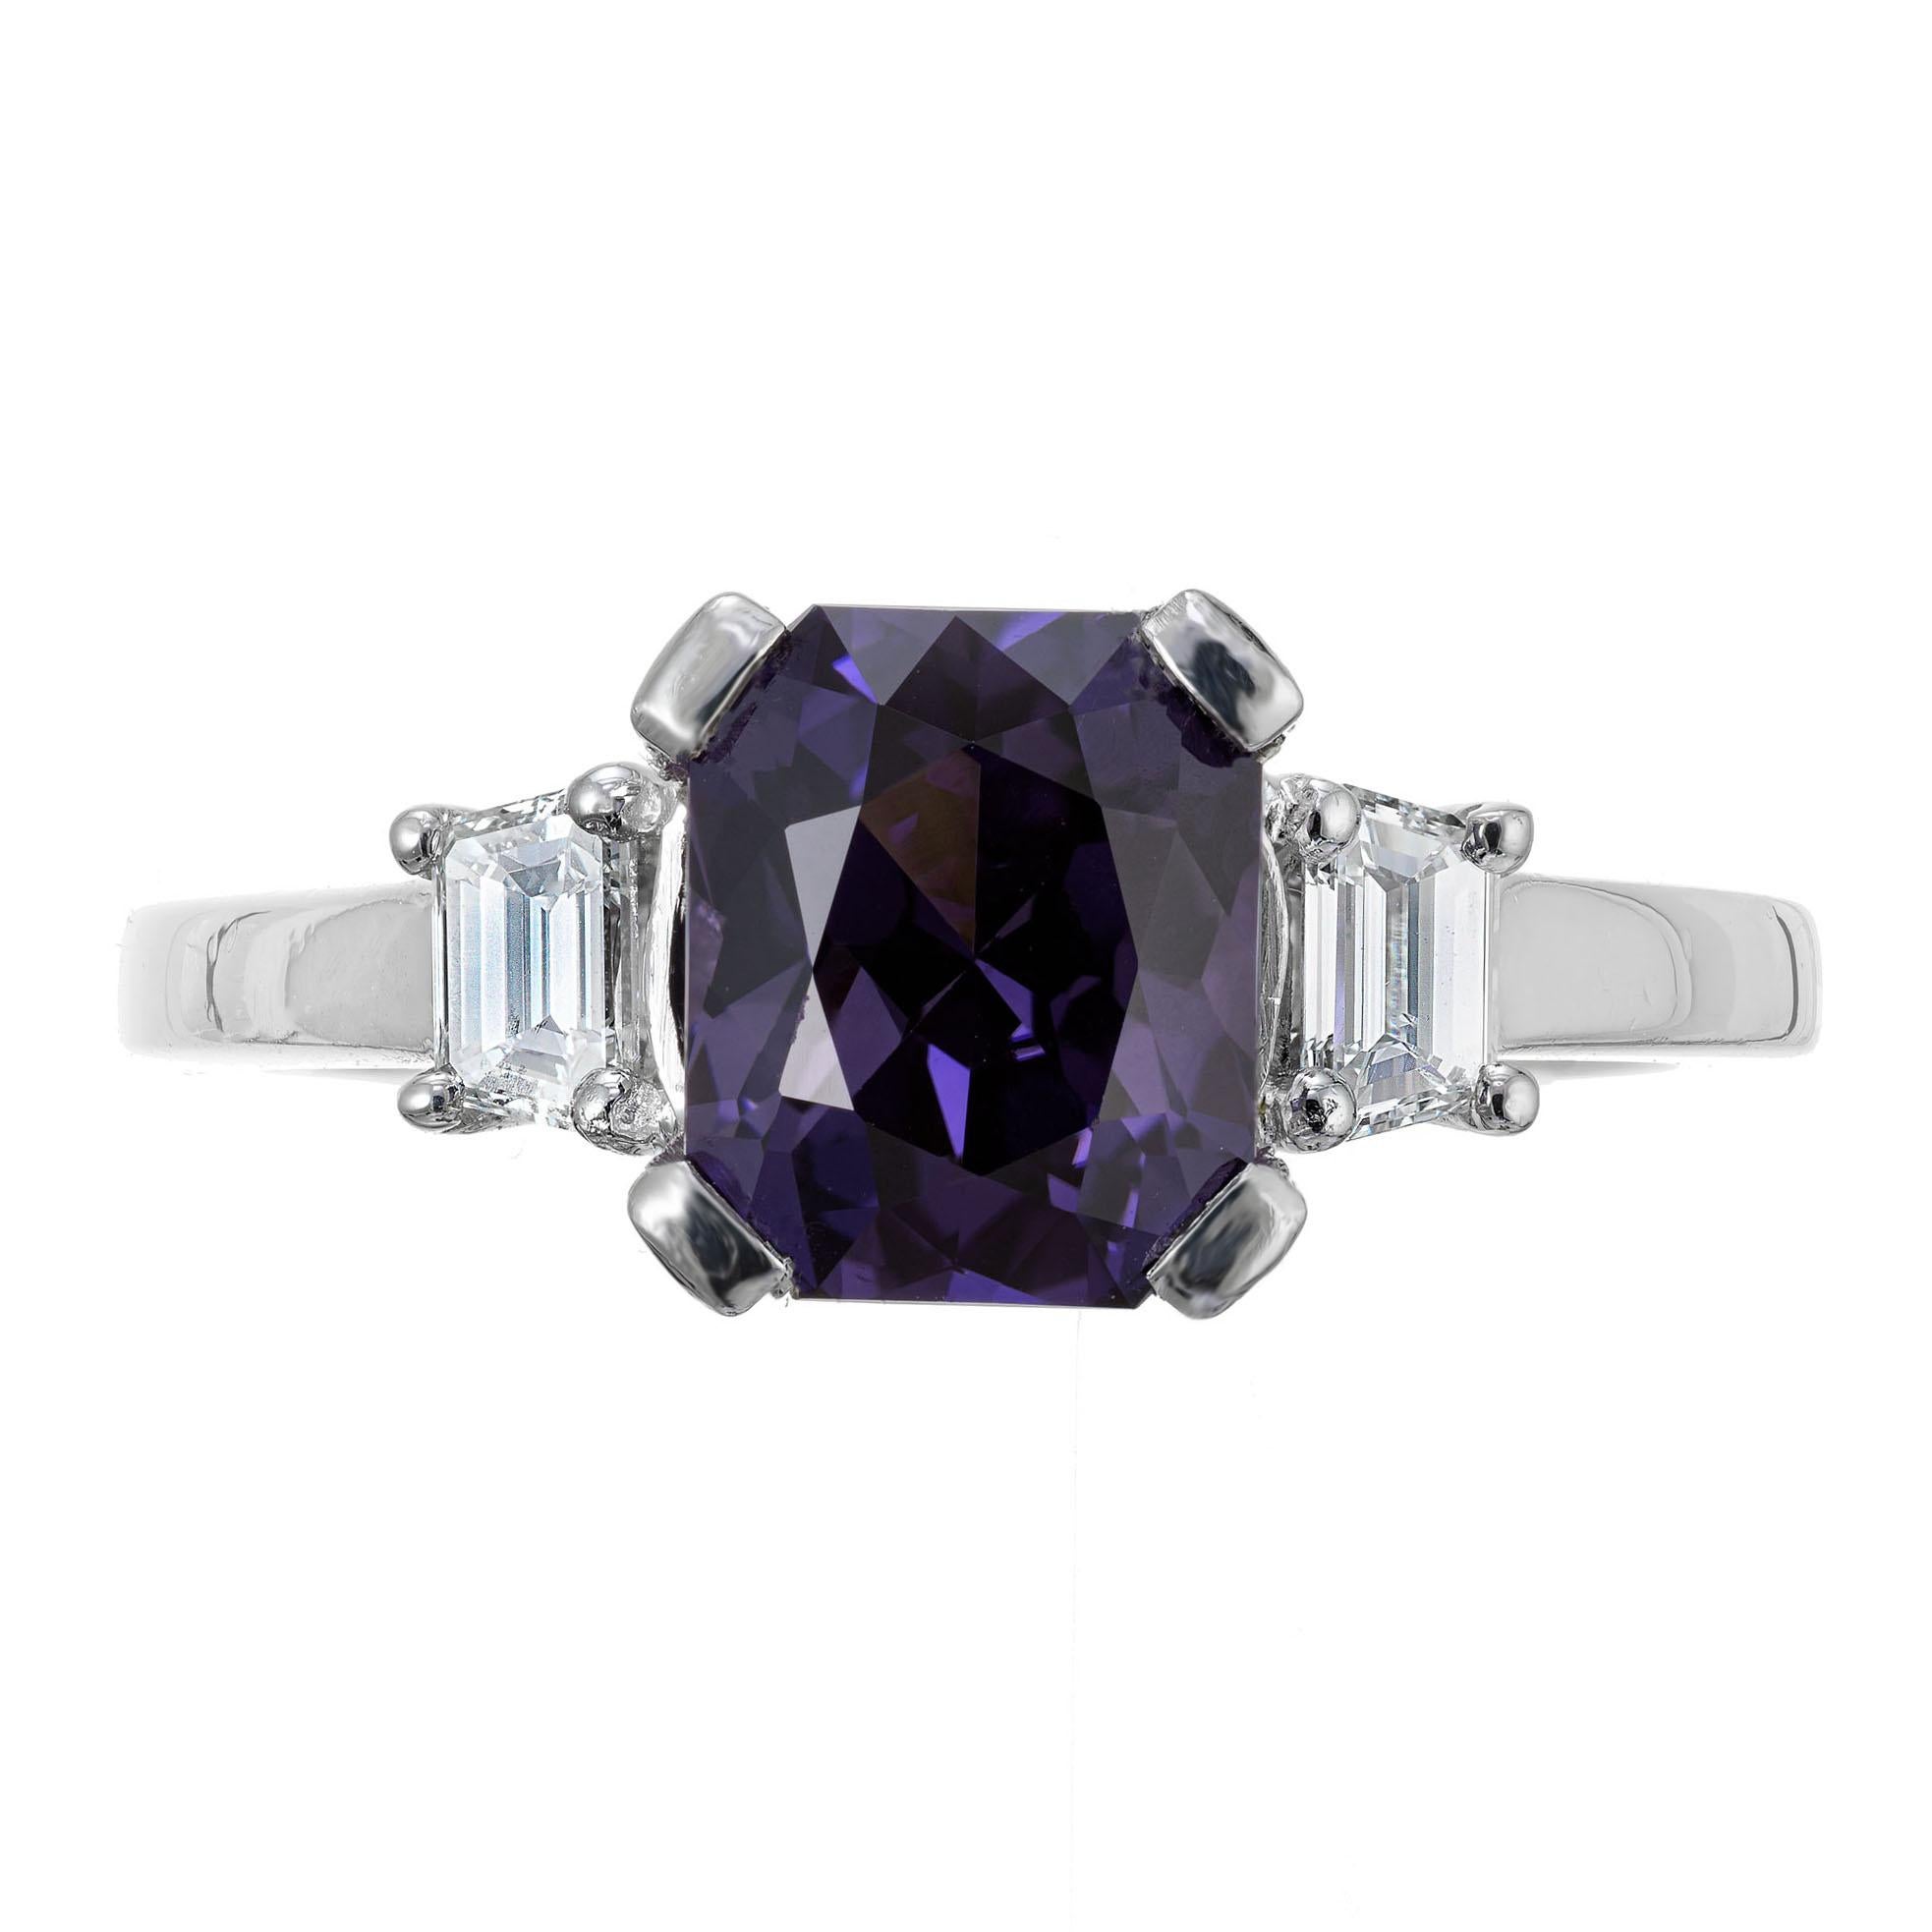 Natalie K sapphire and diamond engagement ring. GIA certified 3.33ct deep rich purple all natural untreated center Sapphire, in a platinum setting with 2 trapezoid side diamonds and 22 round full cut diamonds.  
 
1 octagonal cut purple sapphire,